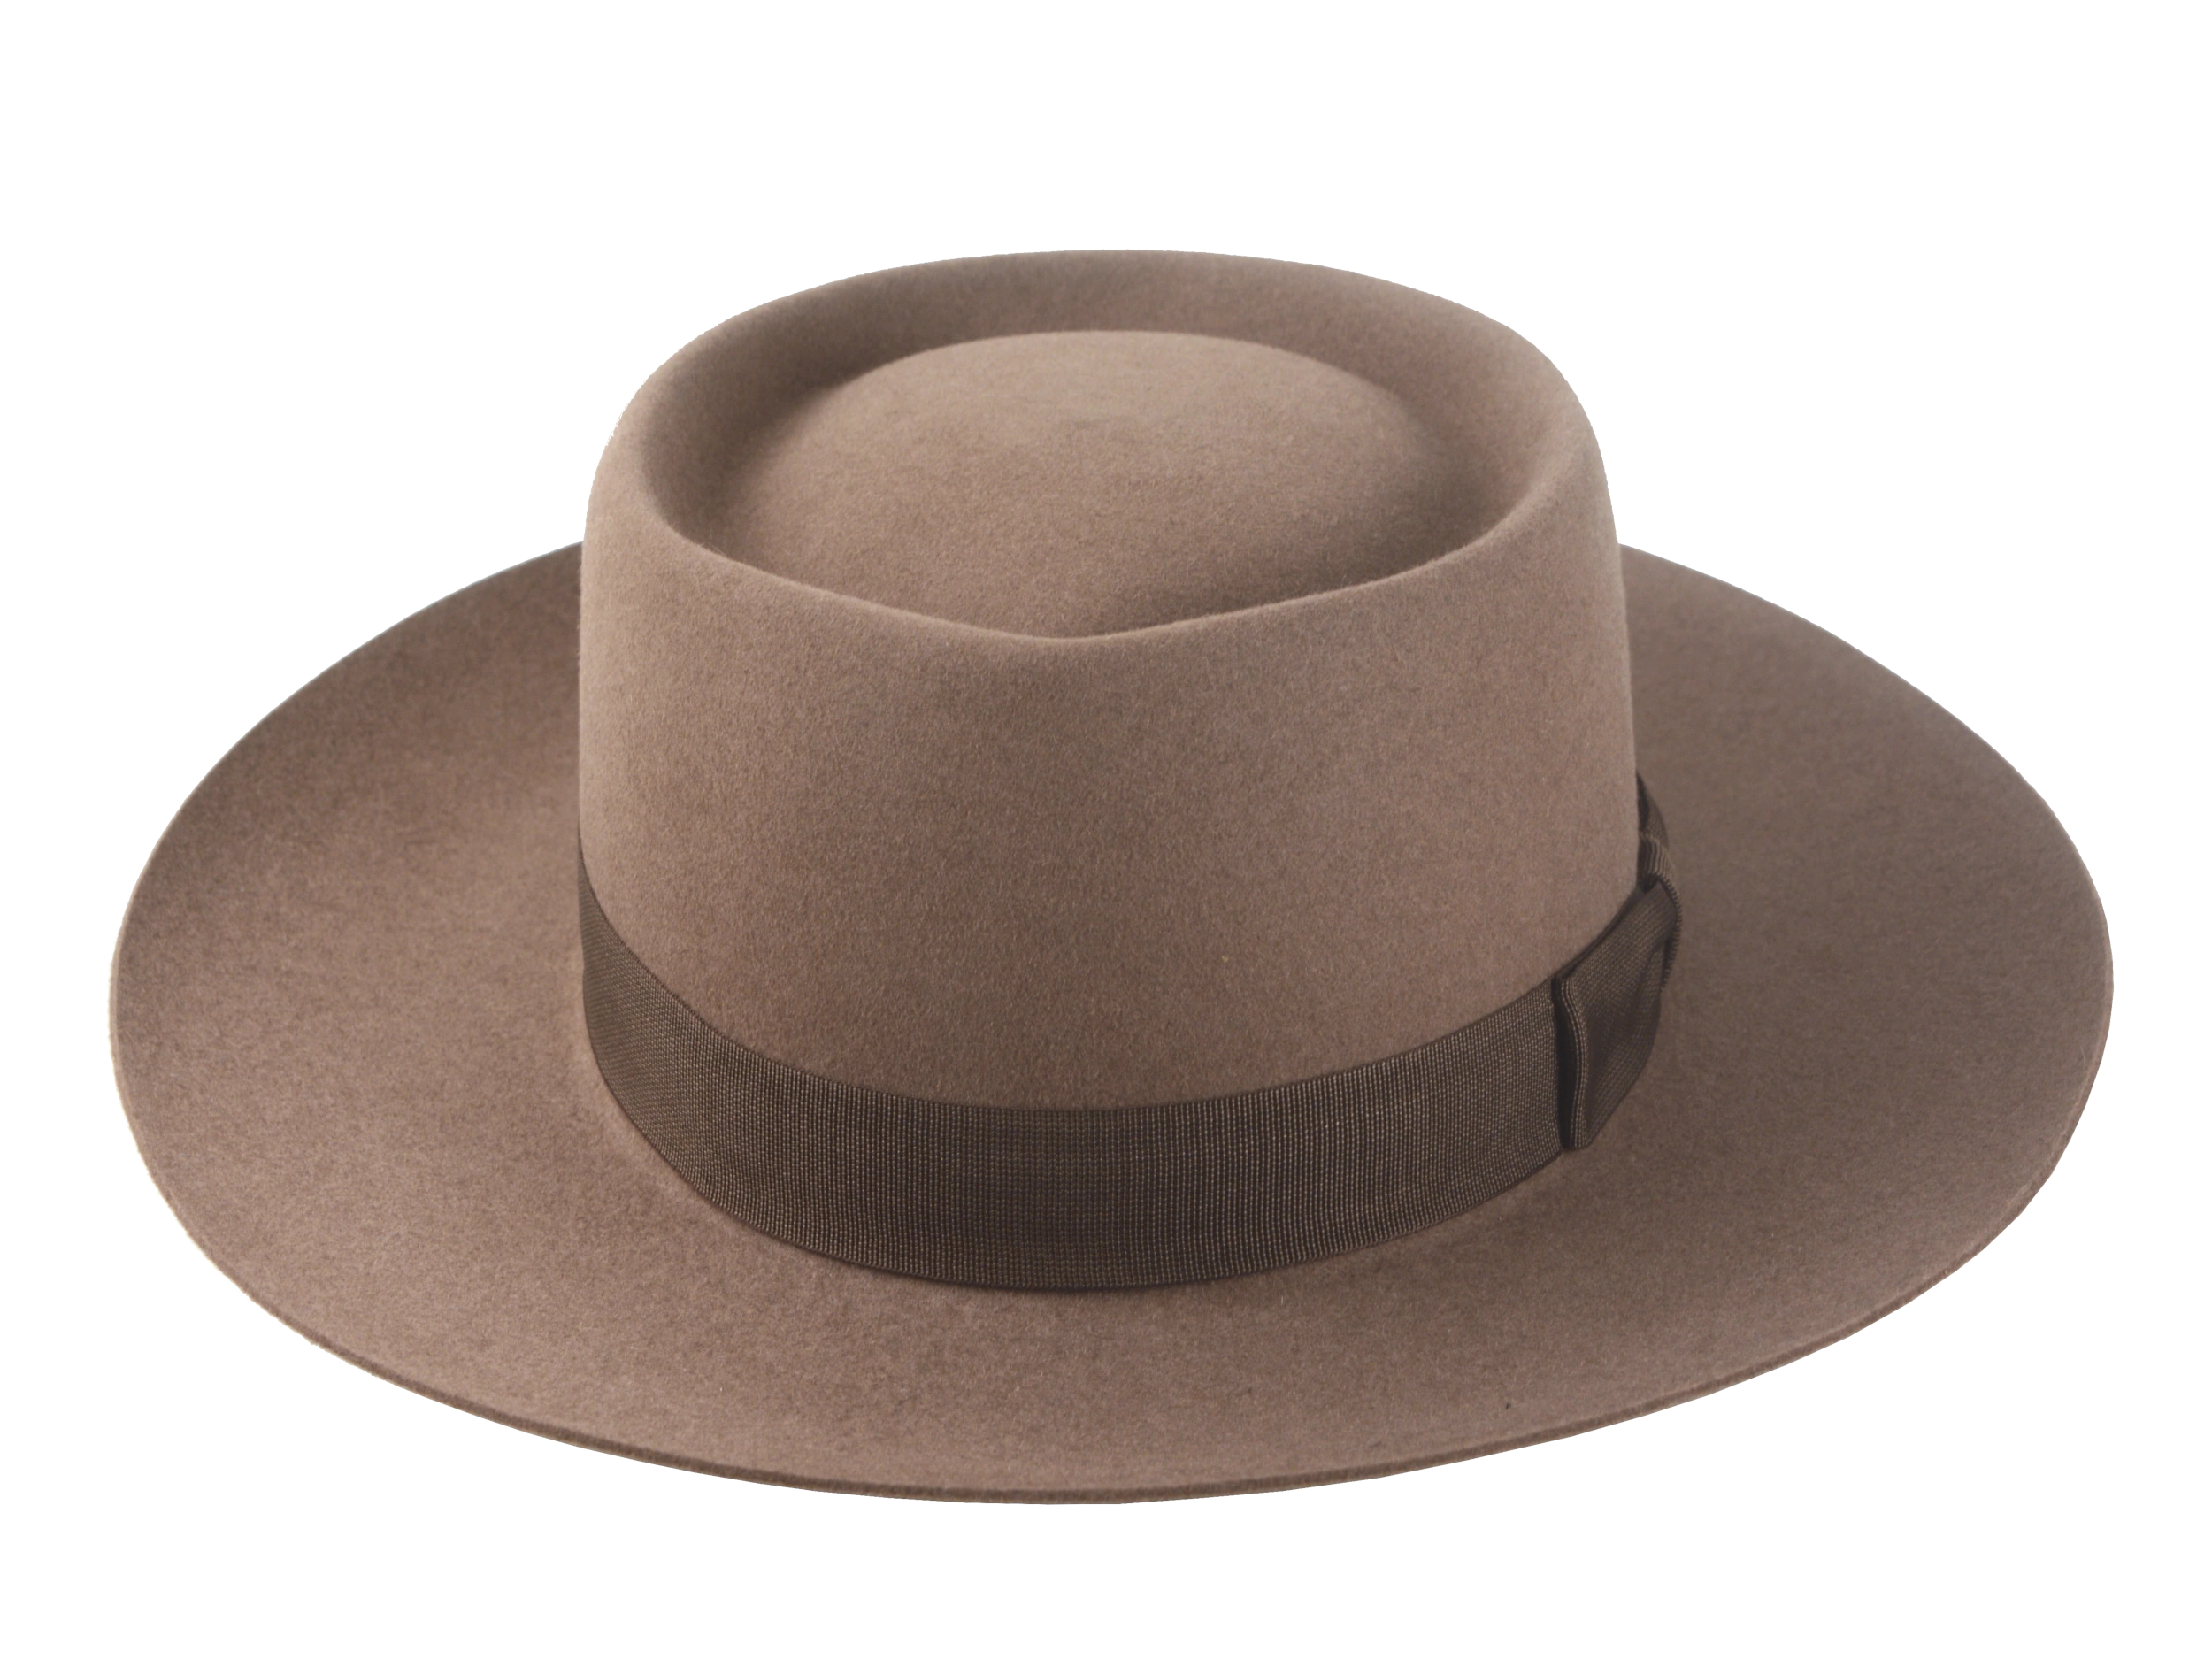 Artisanal wide-brim porkpie hat, named Oppenheimer, in premium beaver felt showcasing the raw edge brim and adorned with a vintage quality ribbon in pecan color against the coffee-hued backdrop of the hat body 6